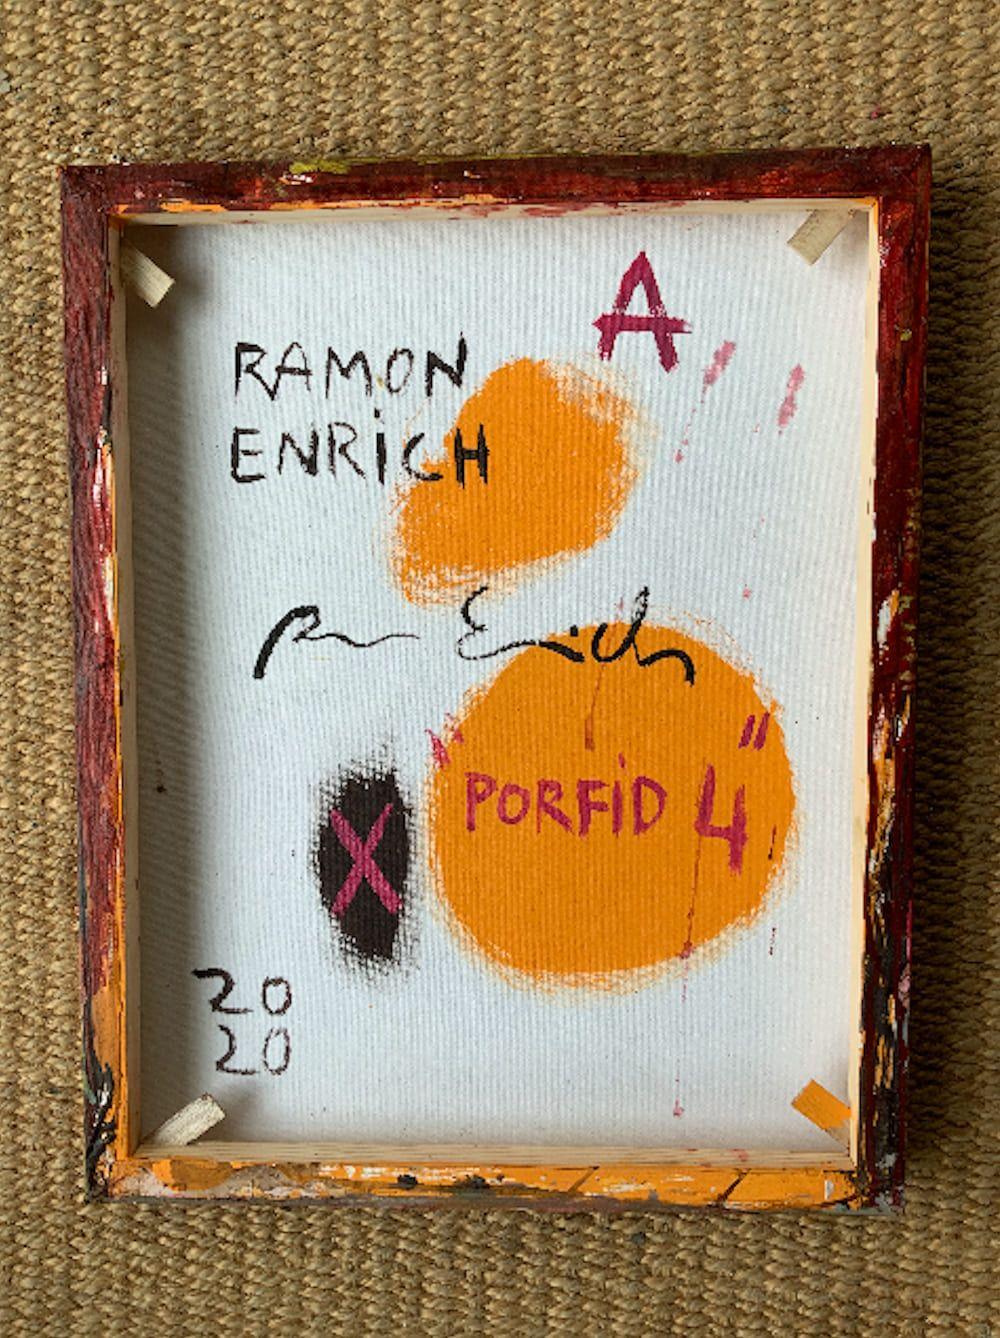 PORFID-4 is a unique acrylic on canvas painting by contemporary artist Ramon Enrich, dimensions are 50.5 x 40 cm (19.9 × 15.7 in). 
The artwork is signed, sold unframed and comes with a certificate of authenticity. 

Ramon Enrich harnesses his